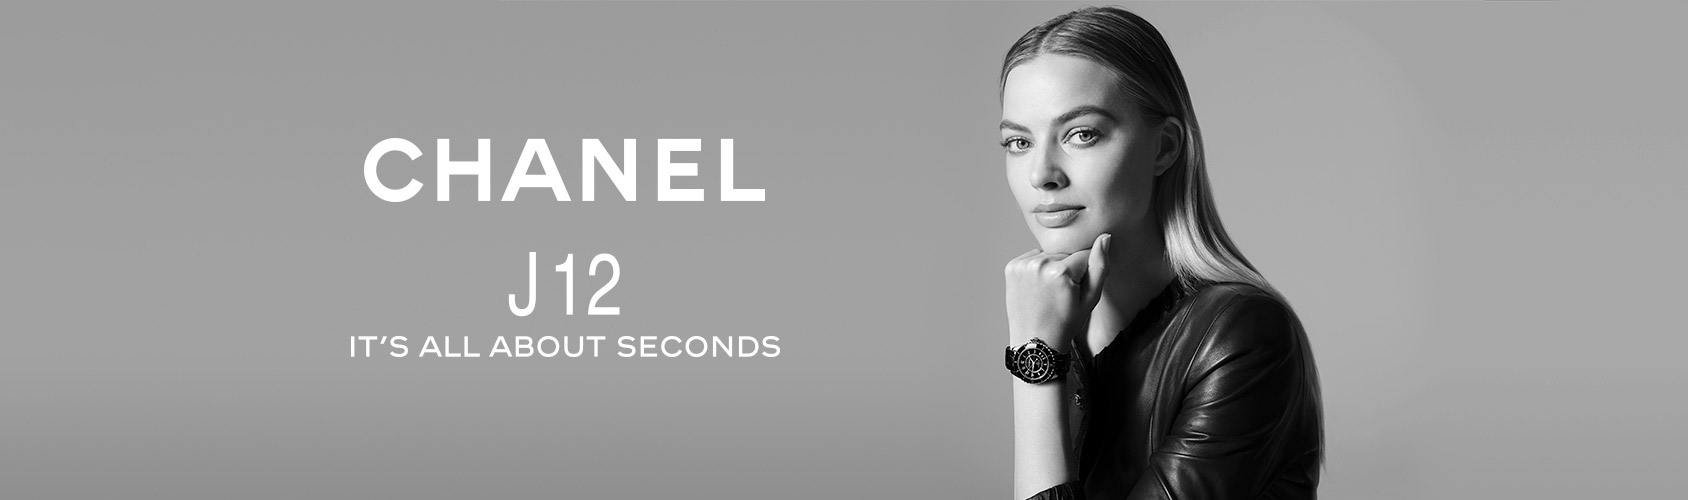 Chanel J12 - It's All About Seconds